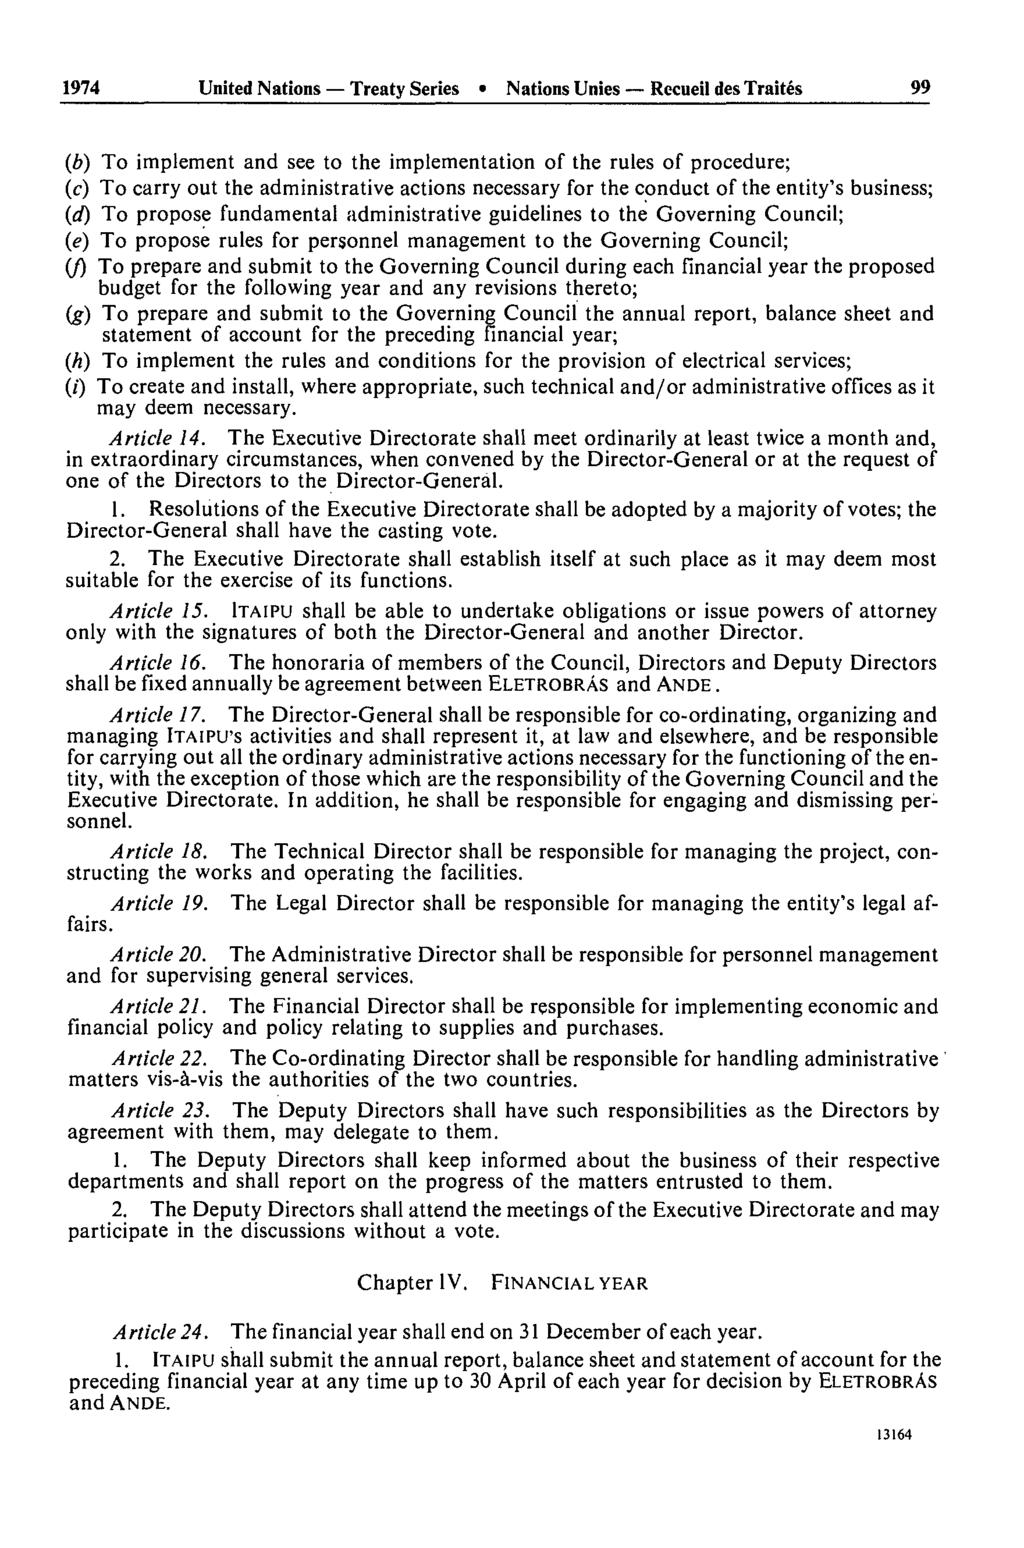 1974 United Nations Treaty Series Nations Unies Recueil des Traités 99 (b) To implement and see to the implementation of the rules of procedure; (c) To carry out the administrative actions necessary